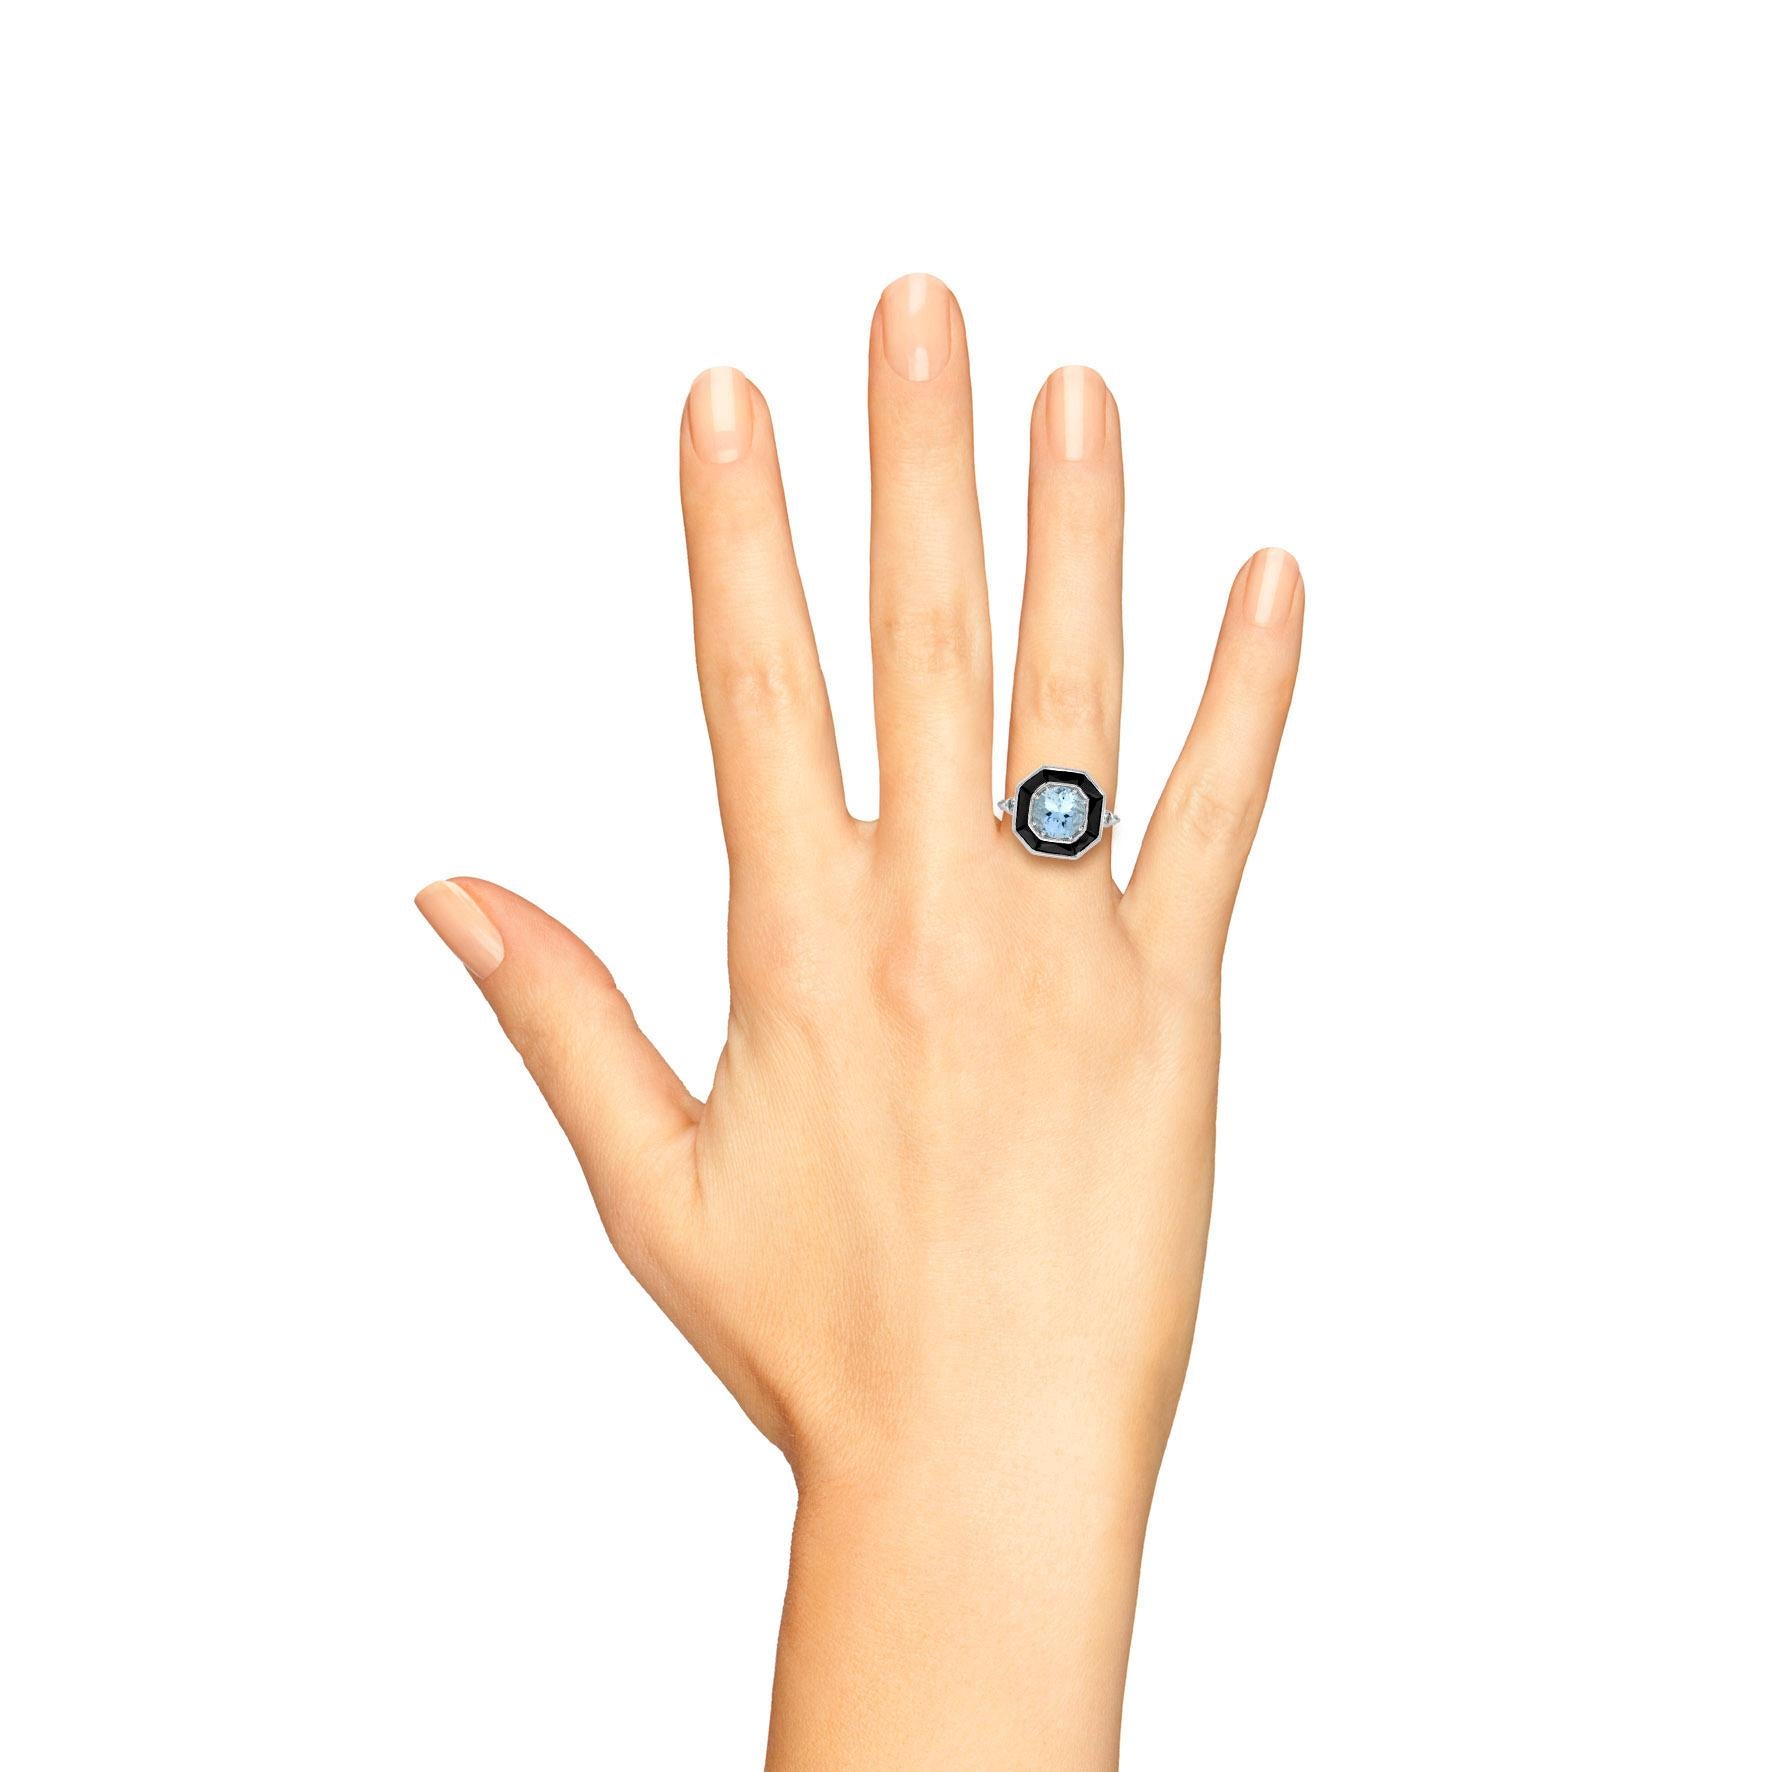 This gorgeous ring captures the iconically stylish aesthetic of the Art Deco era in chic geometric design. The beautifully octagonal design is set with aquamarine in the center, surrounded by custom cut black onyx. Eye catching and classically